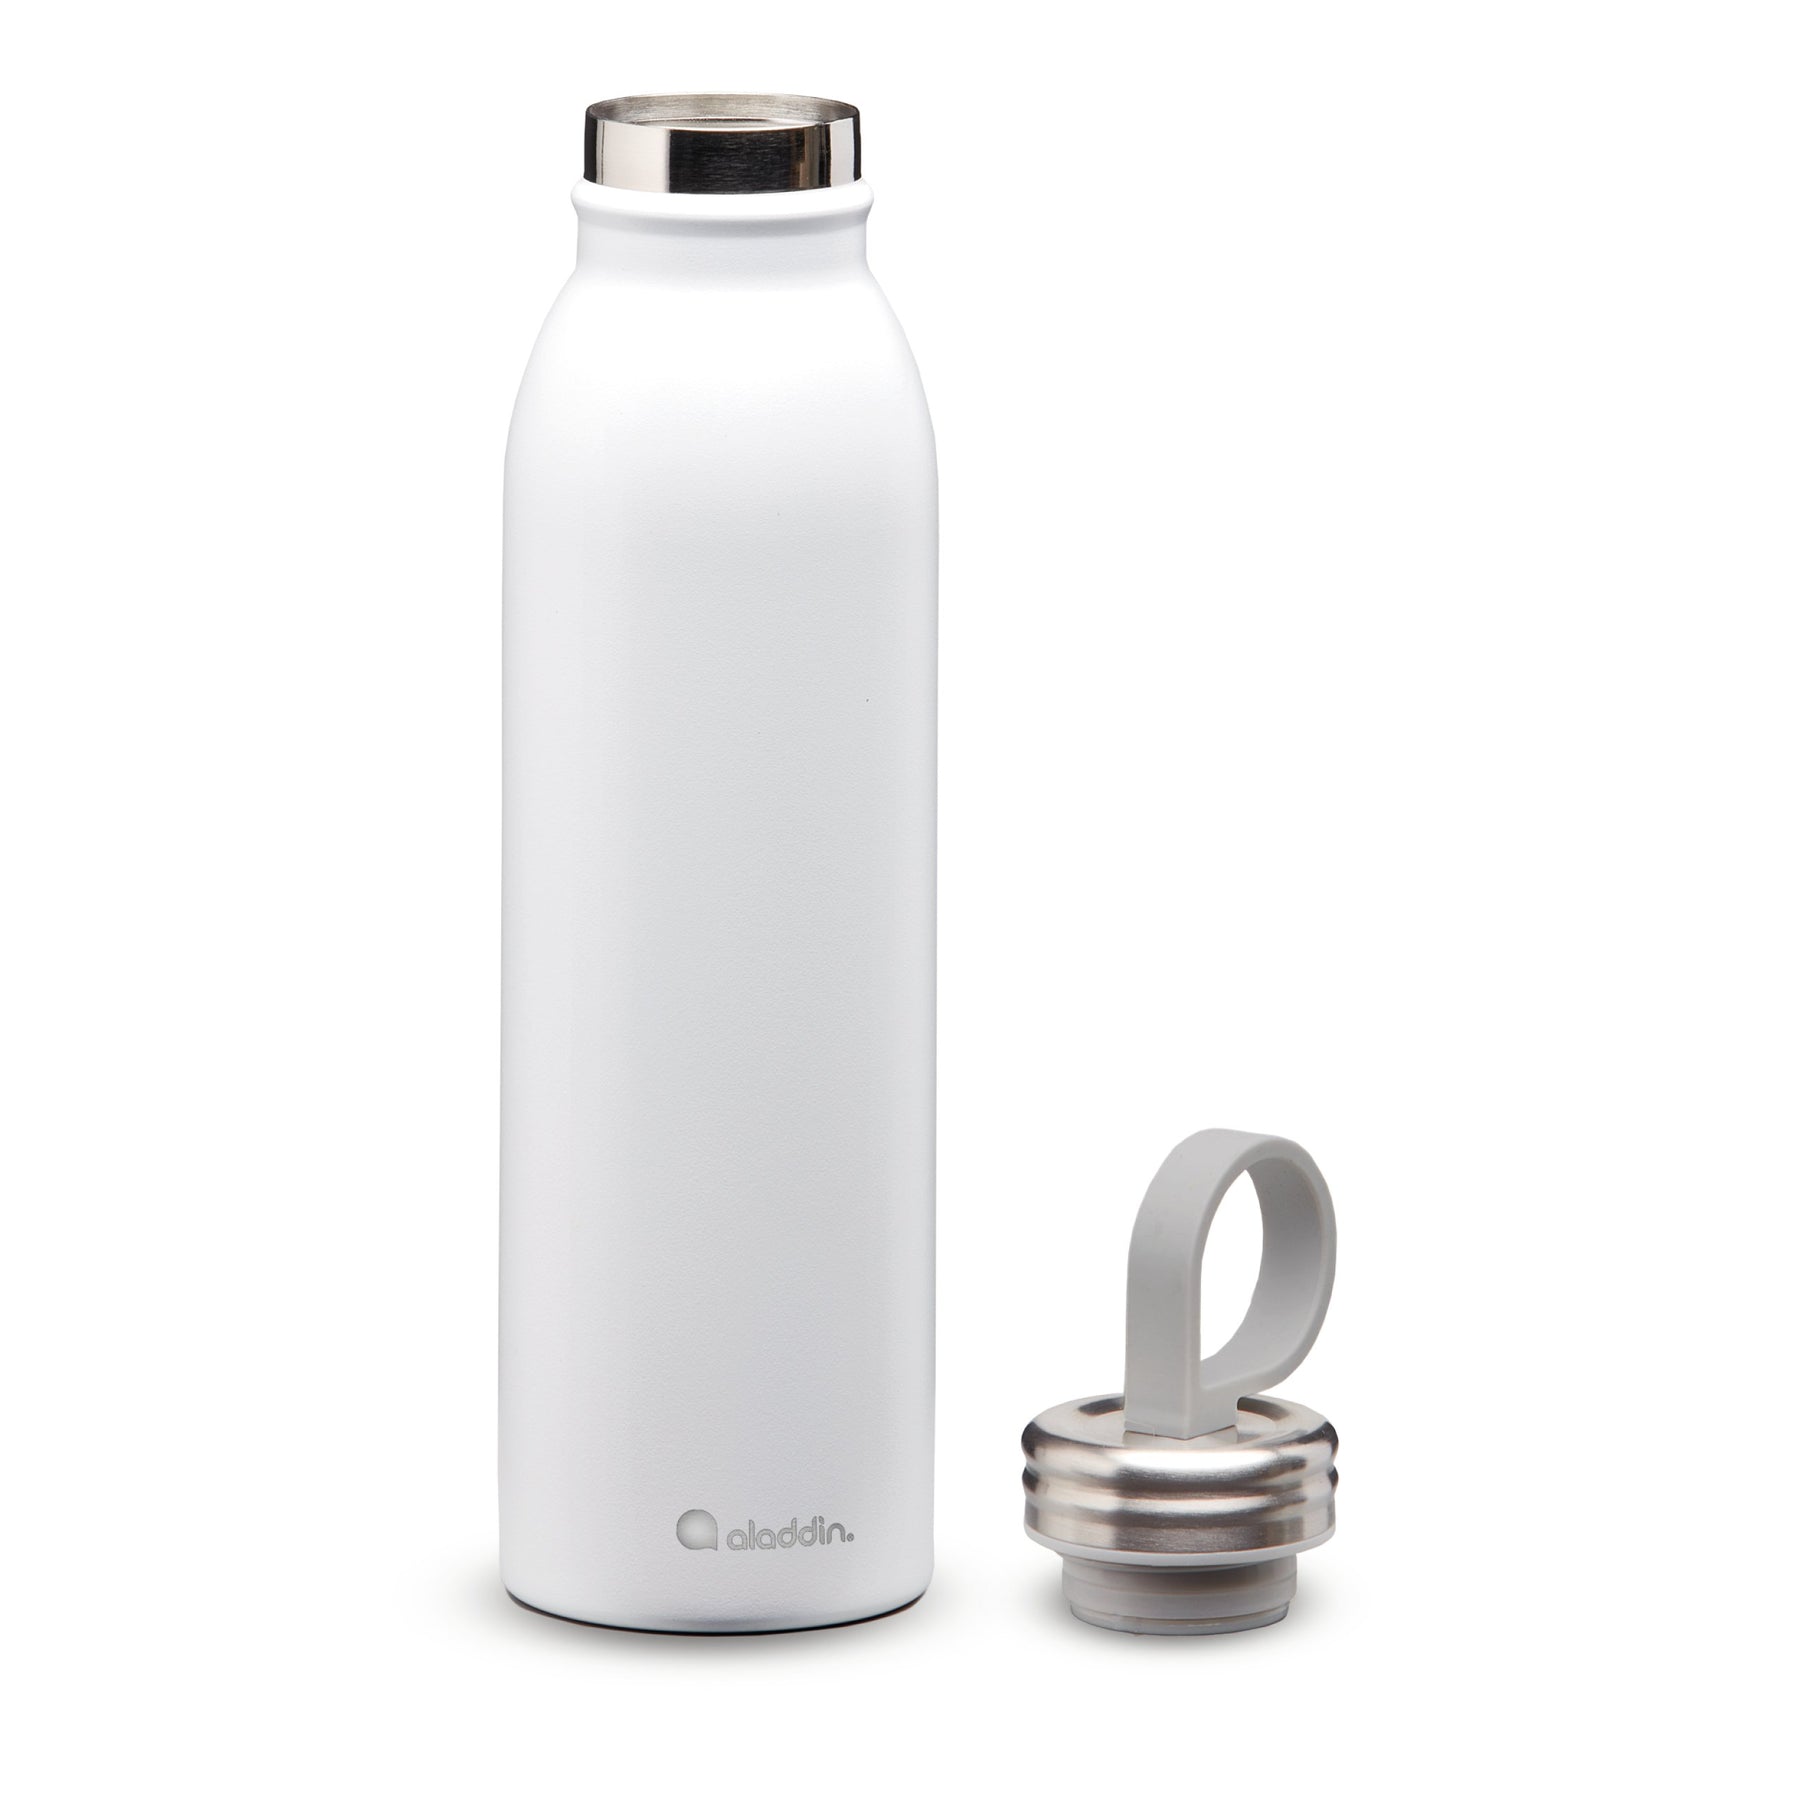 Aladdin-Chilled-Thermavac_-Colour-Stainless-Steel-Water-Bottle-0.55L-Snowflake-White-10-09425-006-Exploded_1800x1800